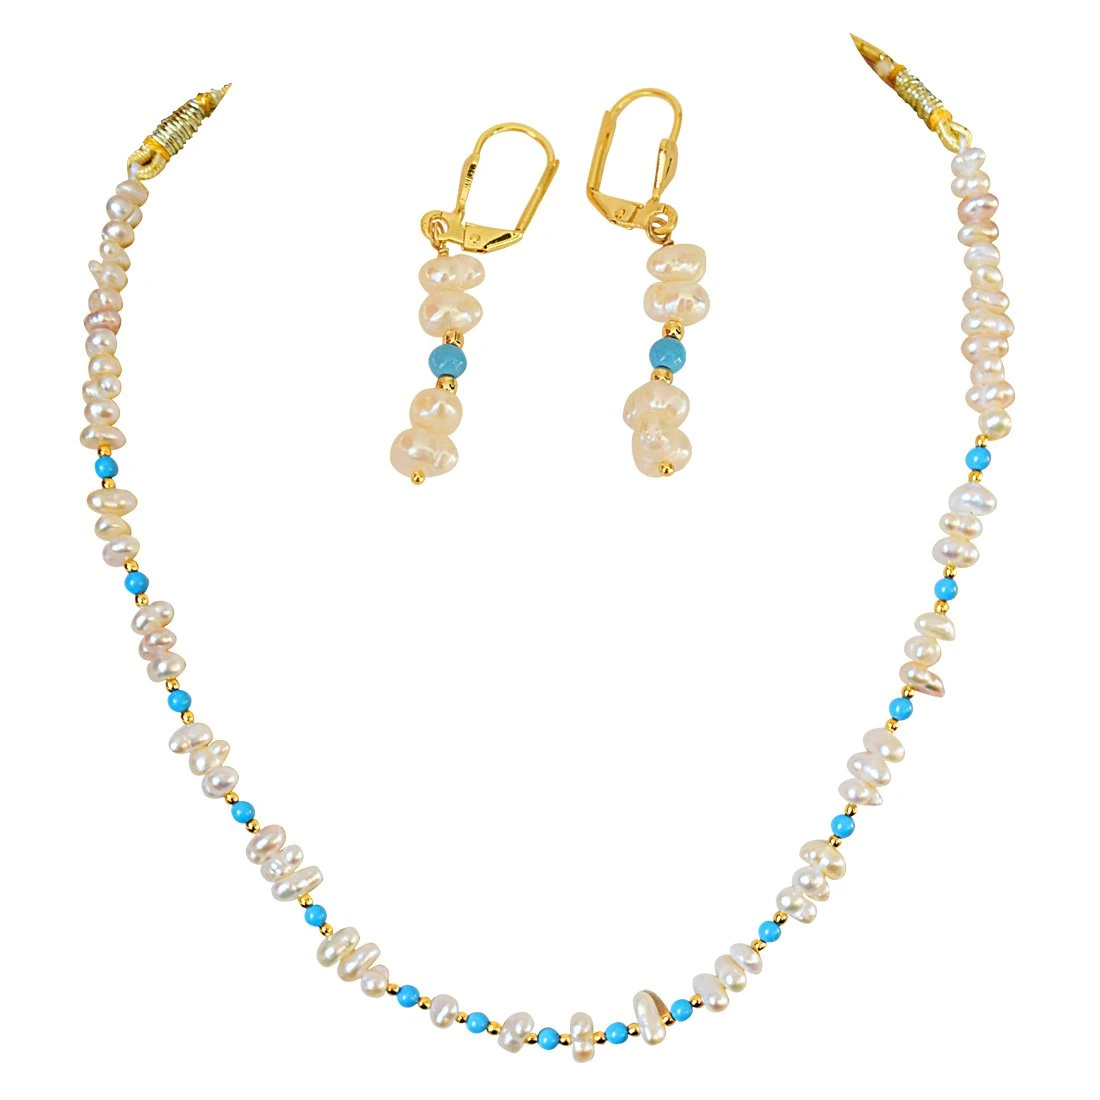 Real Freshwater Pearl and Turquoise Beads Necklace & Earring Set for Women (SN878)